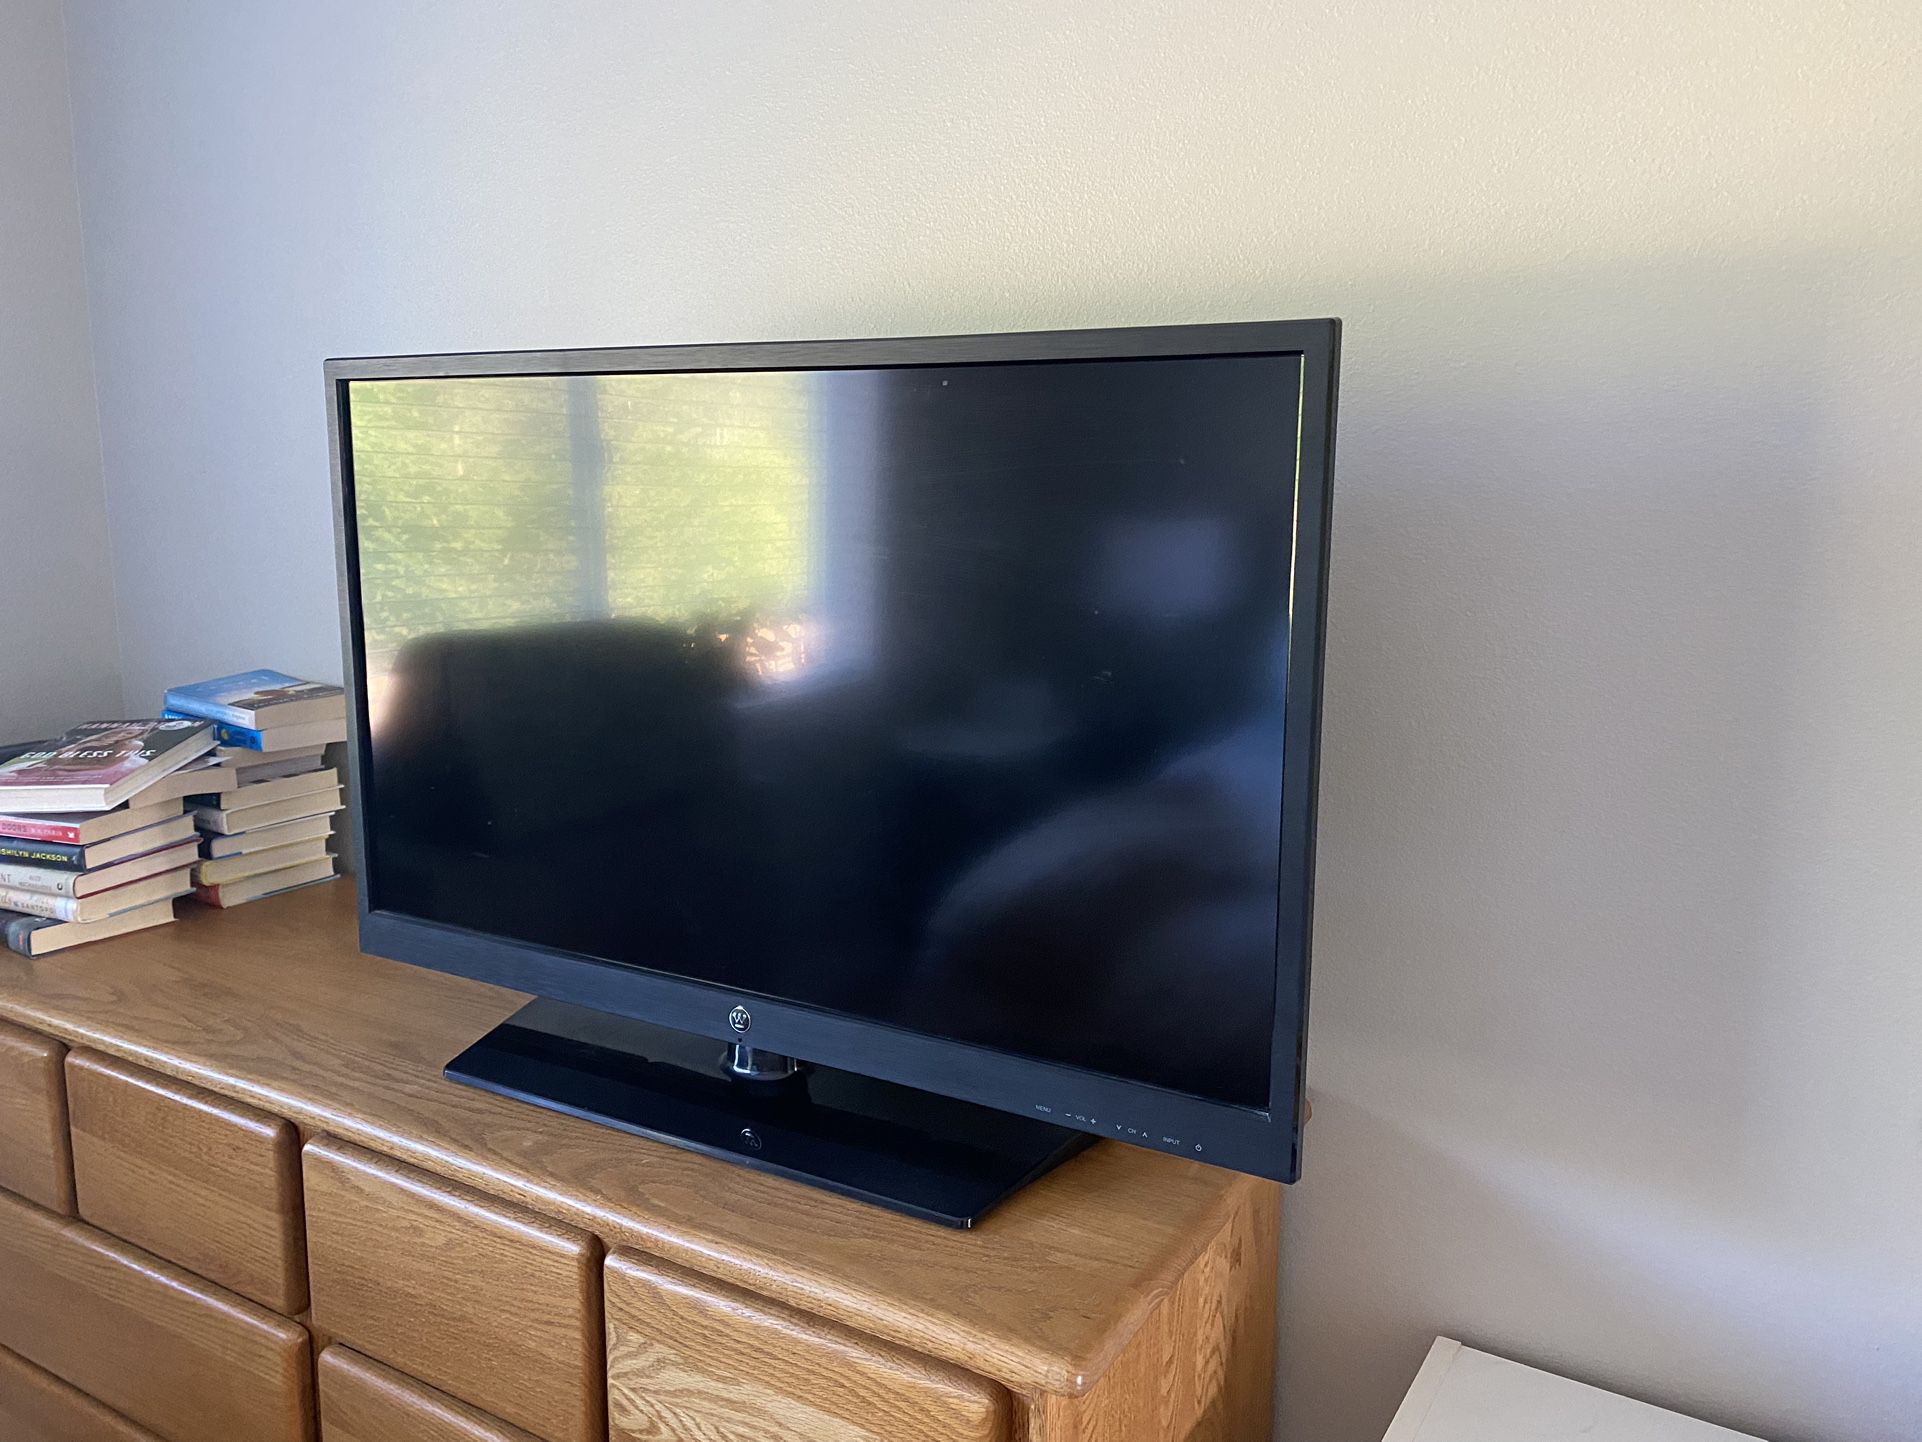 Westinghouse TV 40 Inch